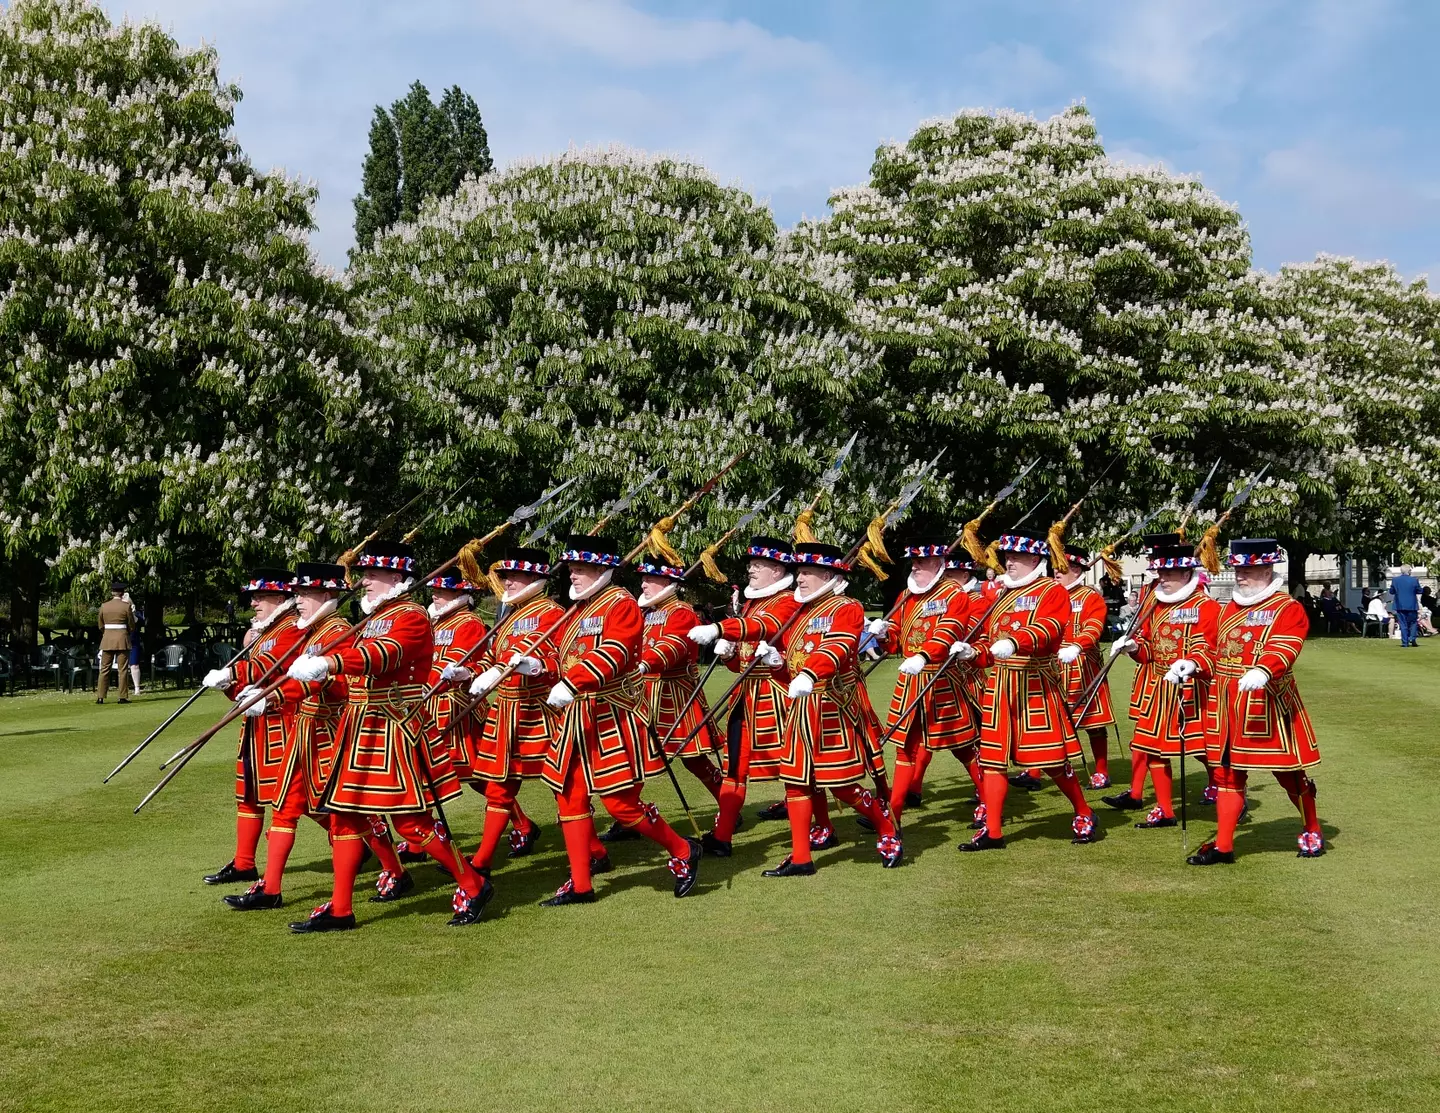 This is what the Beefeaters actually wear. Checkmate, Wayne.